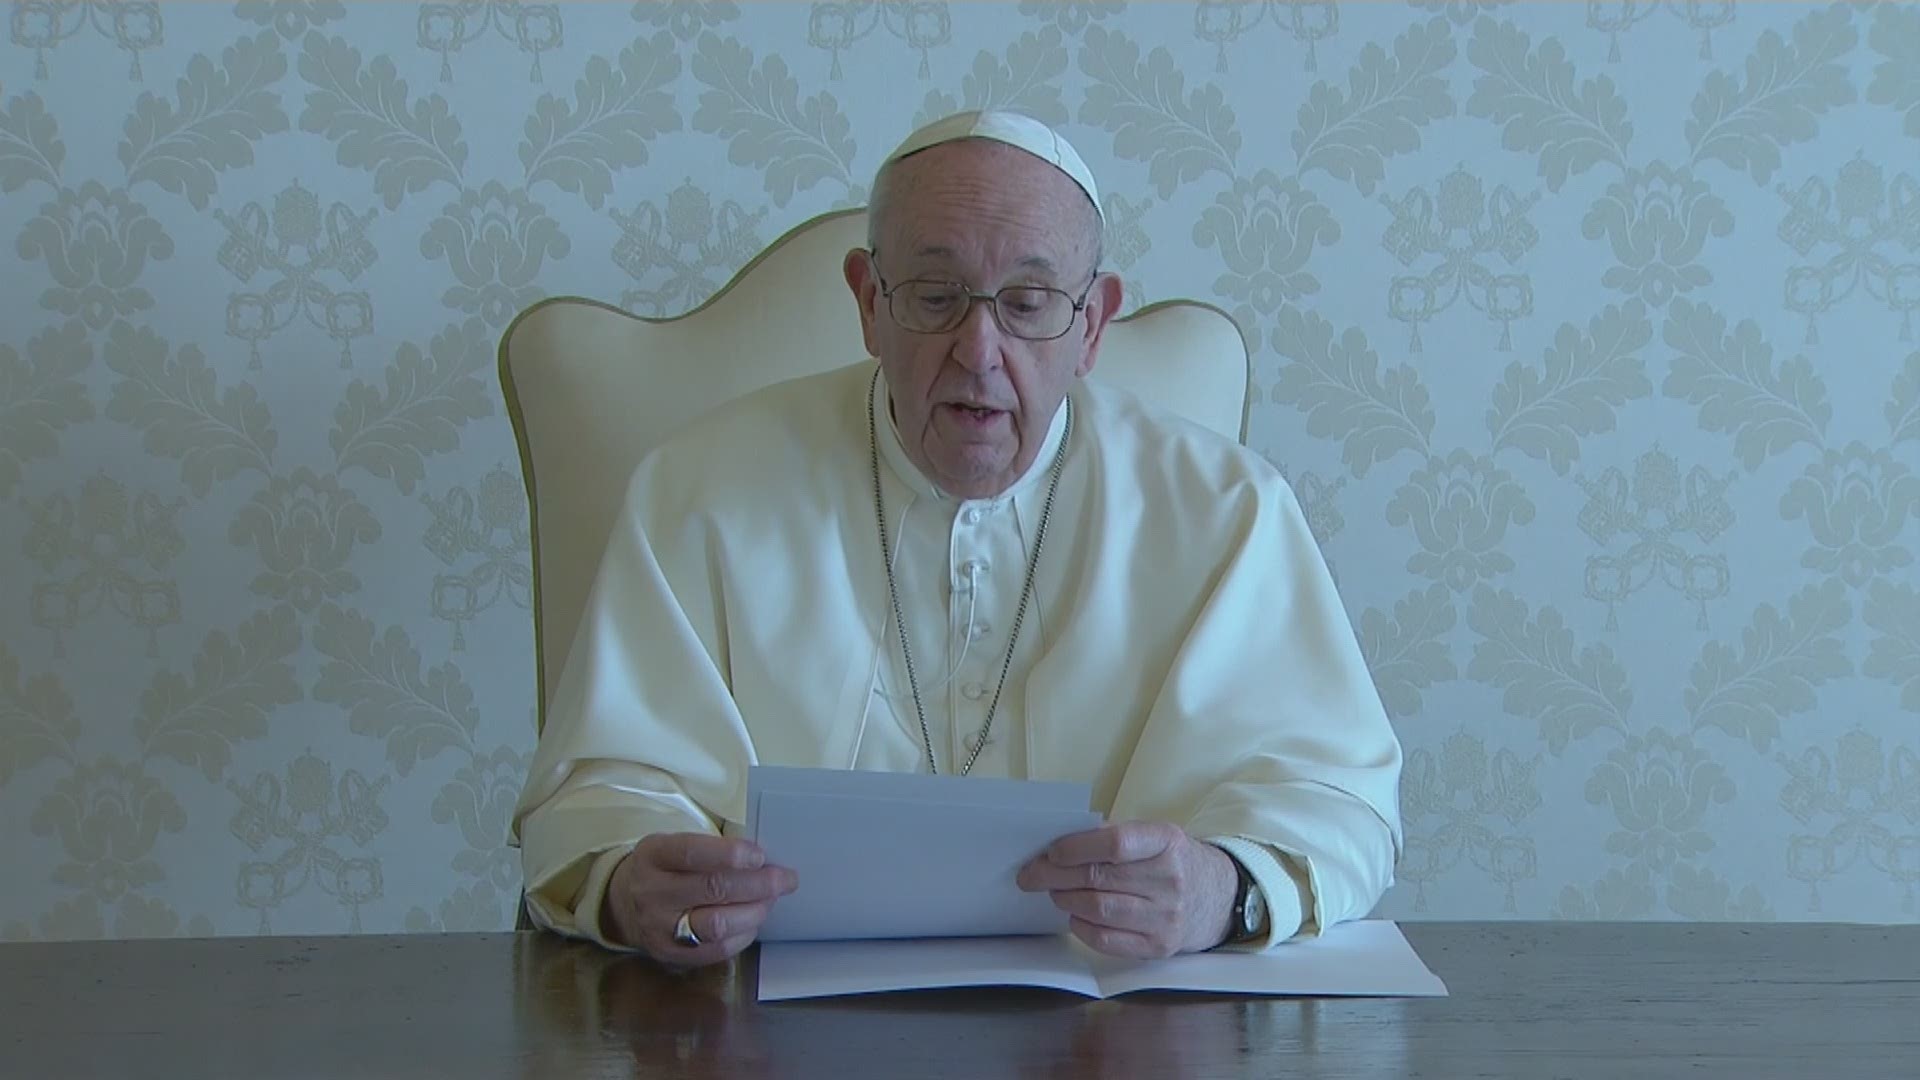 A day of ahead of his departure for Iraq, Pope Francis has released a video message for the people of Iraq.